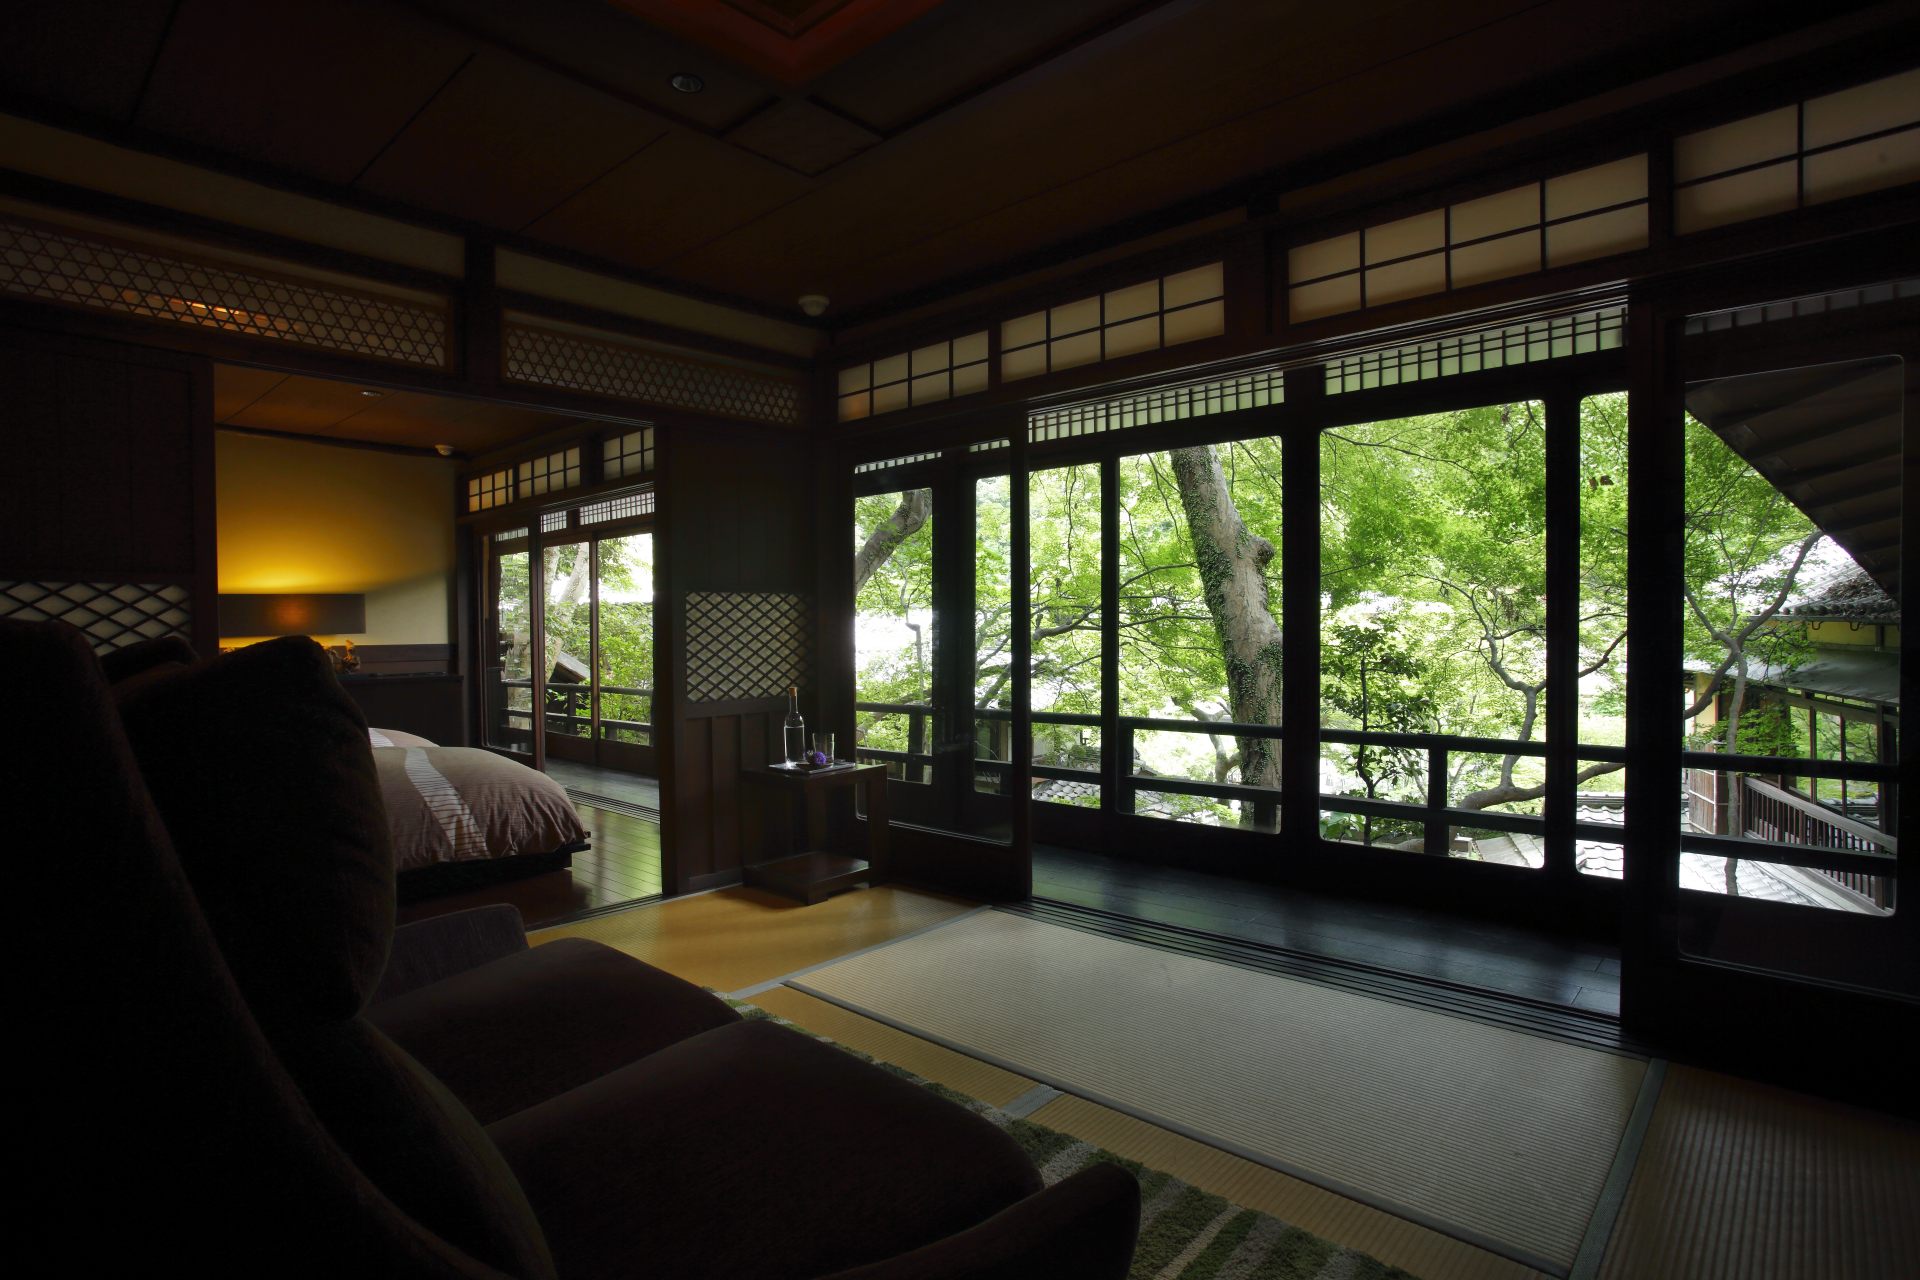 From your private room, view the natural greenery of curated gardens through the Taisho period (1912-1926) glass windows.